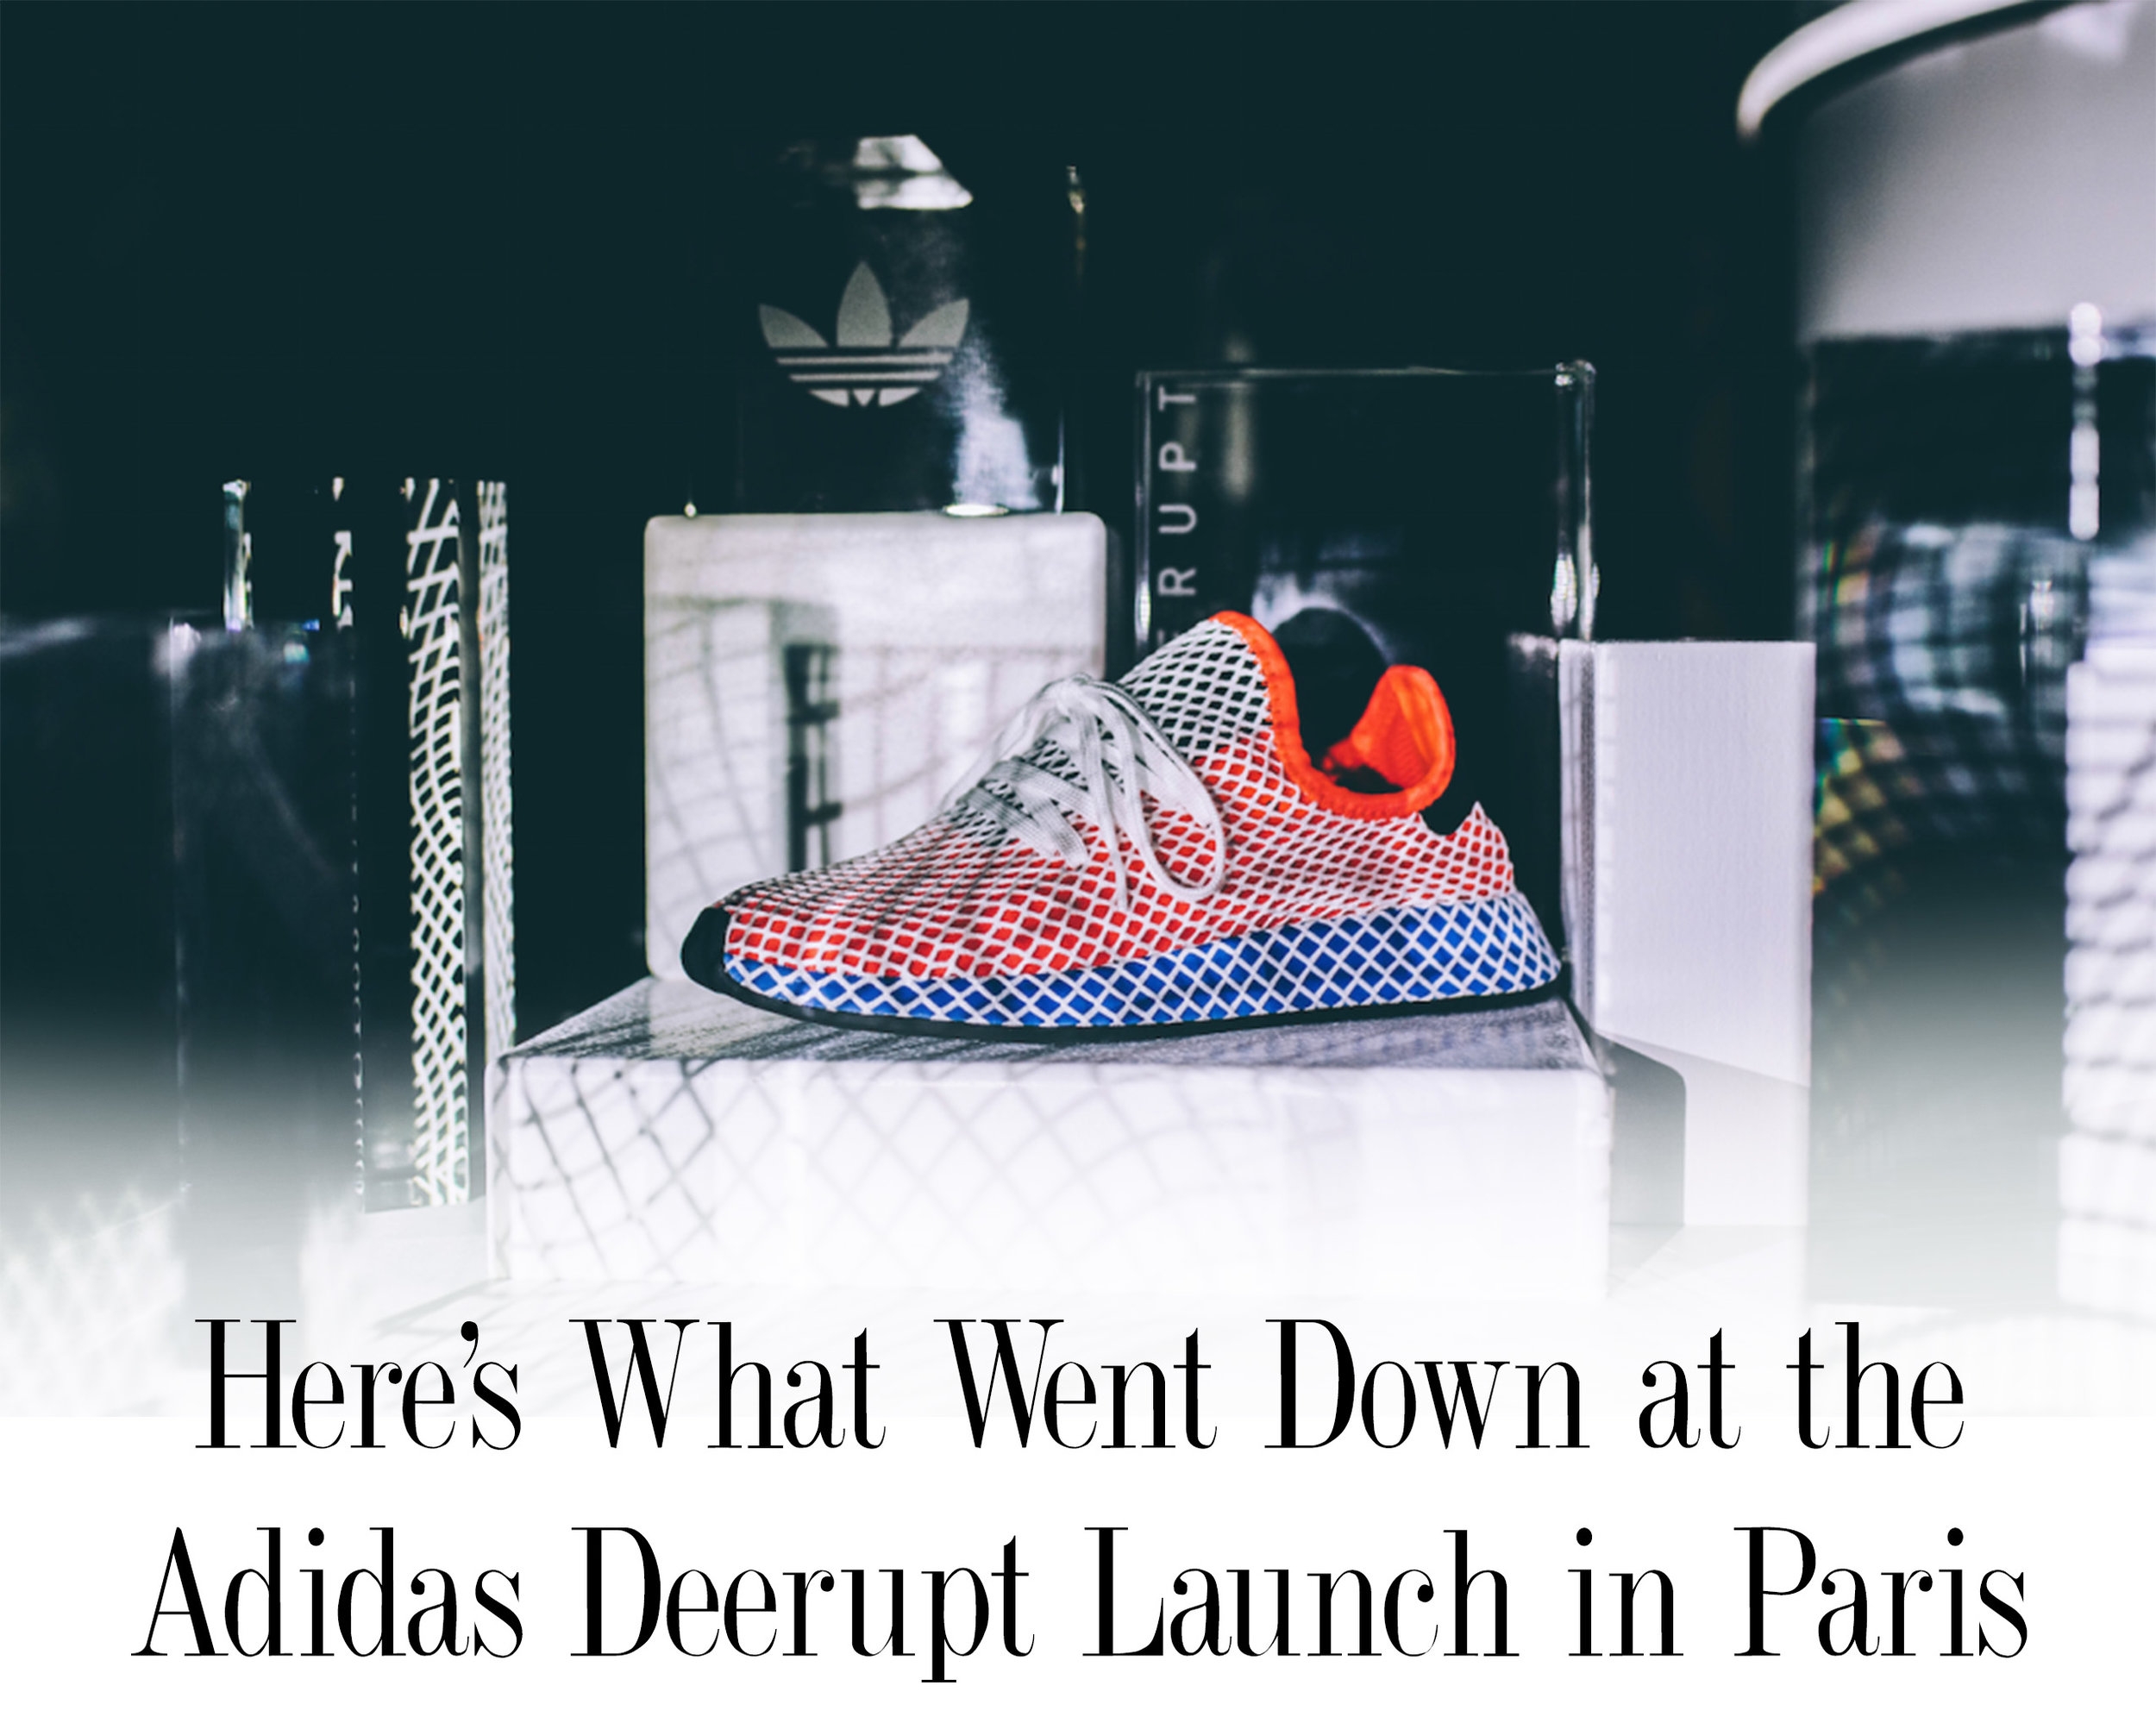 Uncle or Mister build up humor Adidas: The Deerupt Experience — CATCH PREP CHARTER HIGH SCHOOL